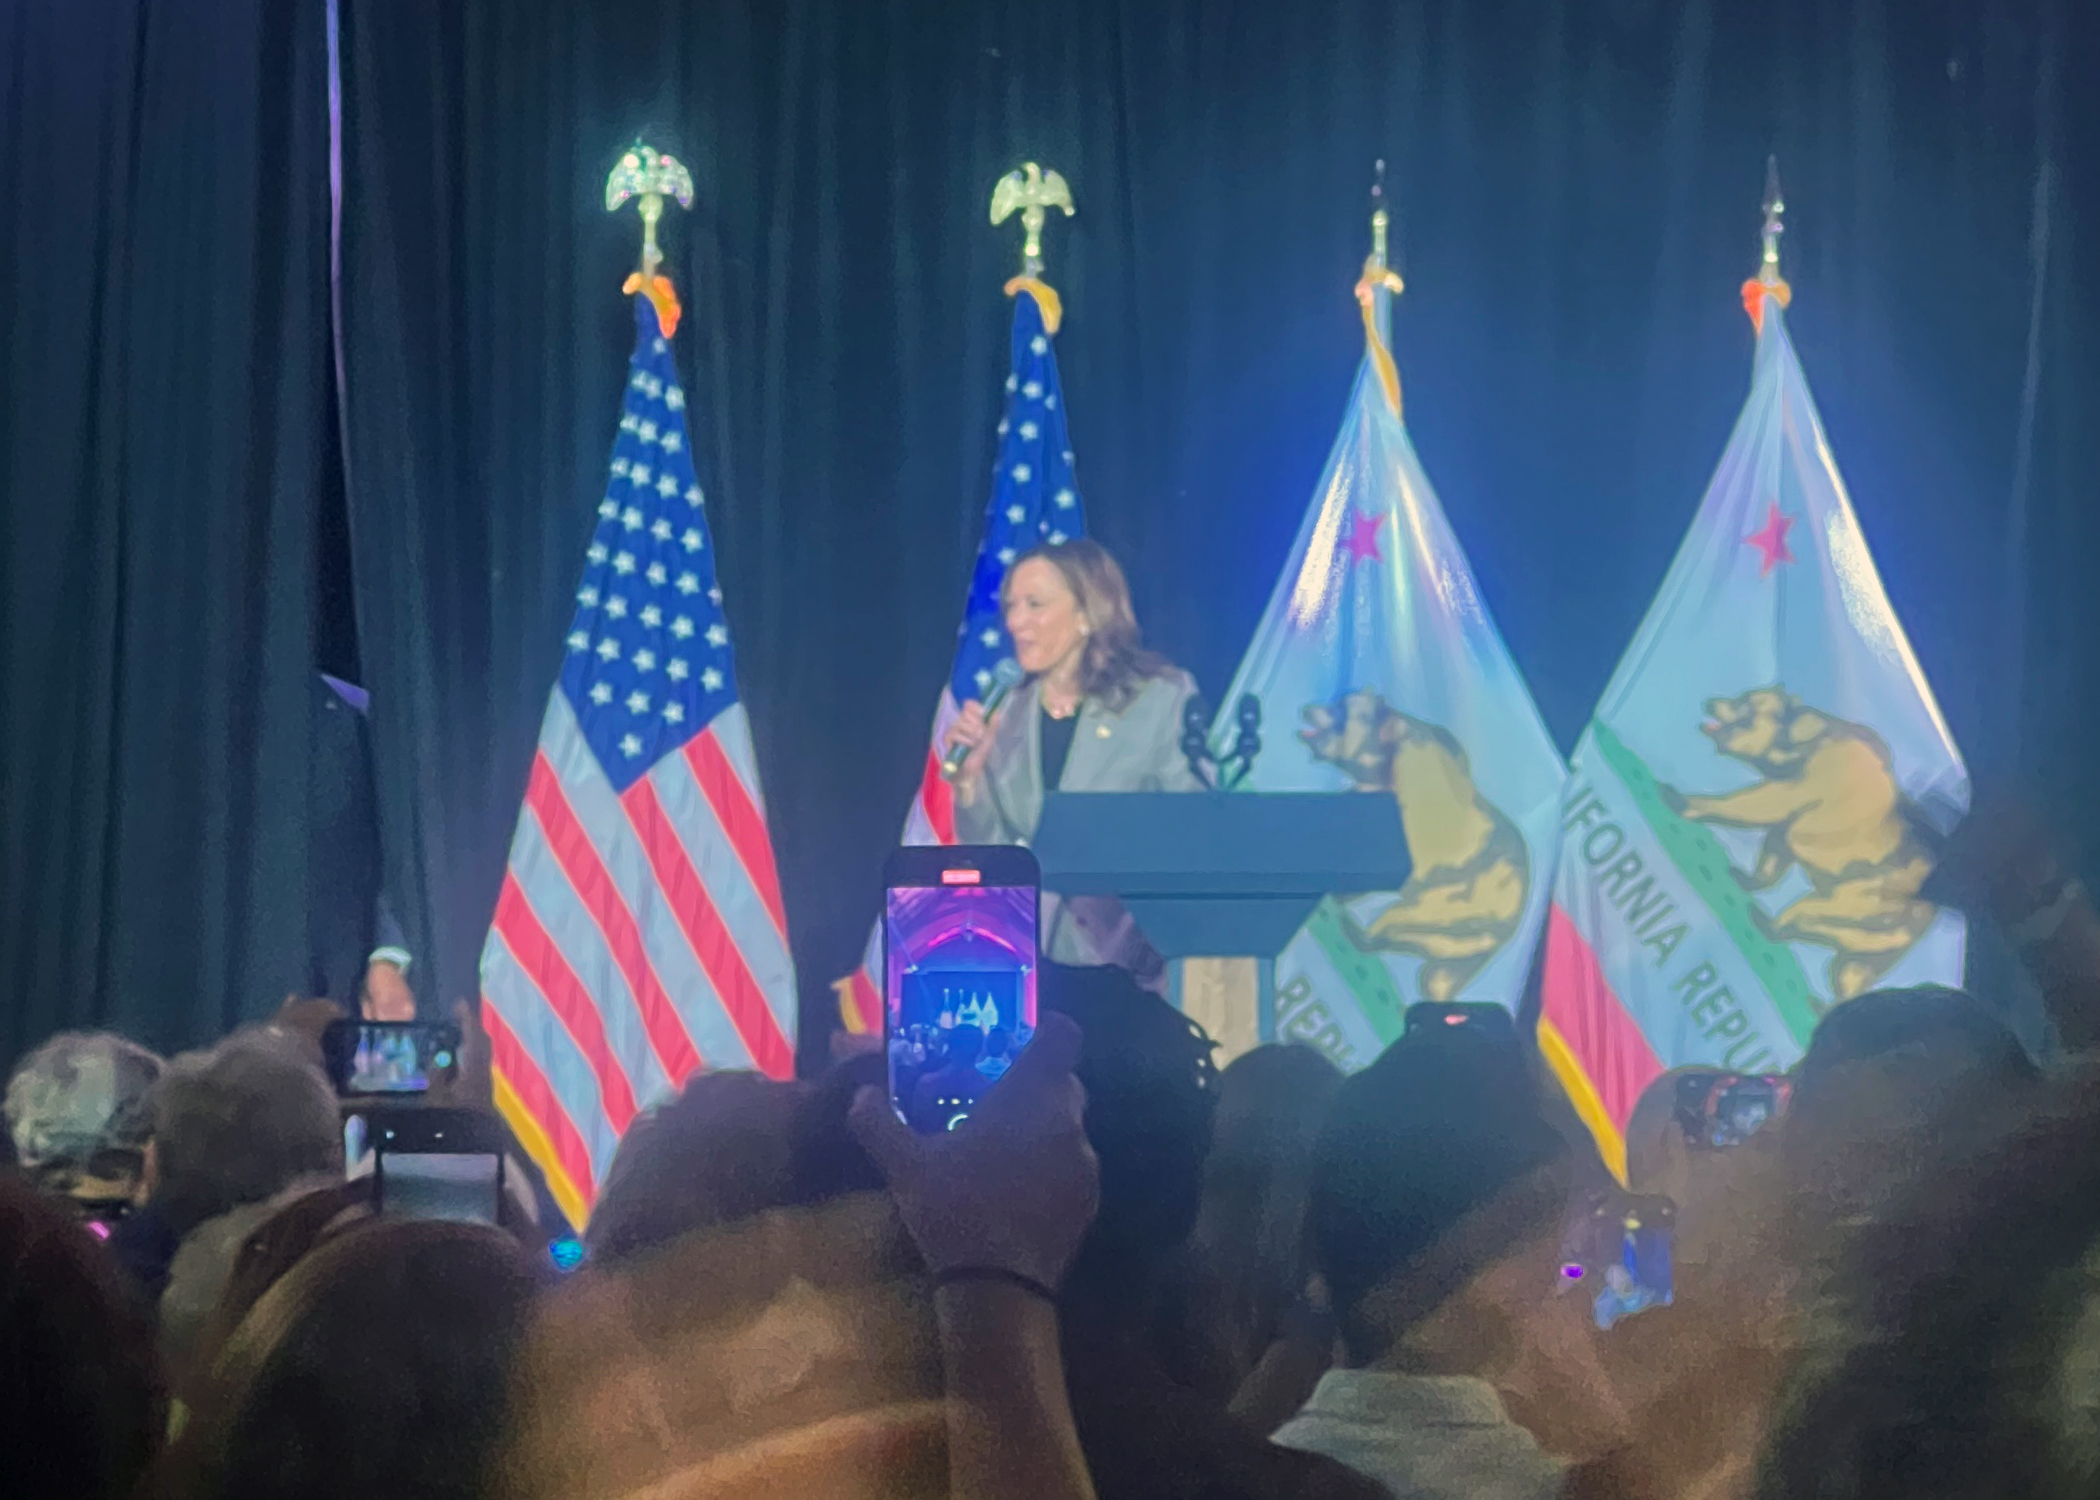 A speaker stands at a podium on a stage, with American and California Republic flags behind them. The audience is holding up phones, capturing the moment.